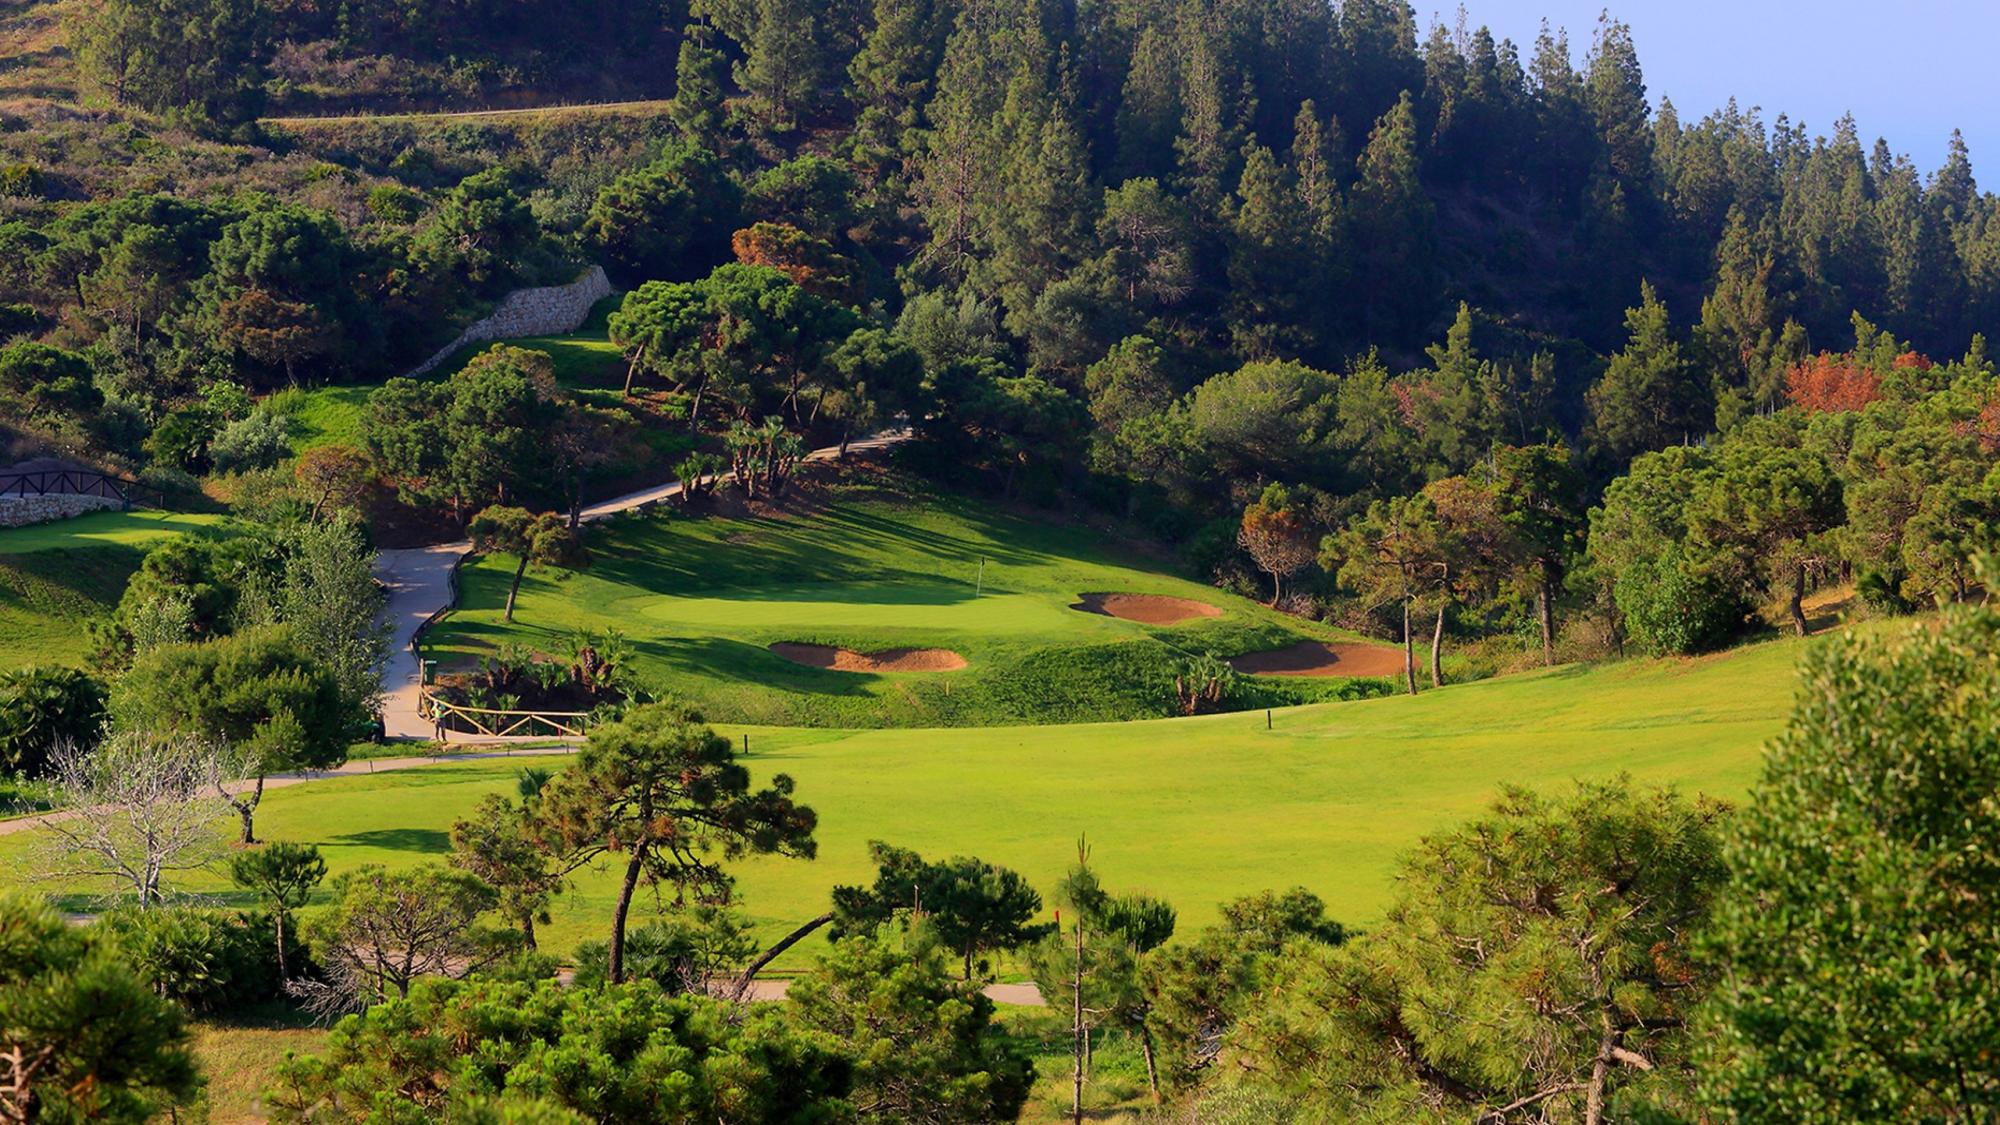 The El Chaparral Golf Club's beautiful golf course within pleasing Costa Del Sol.